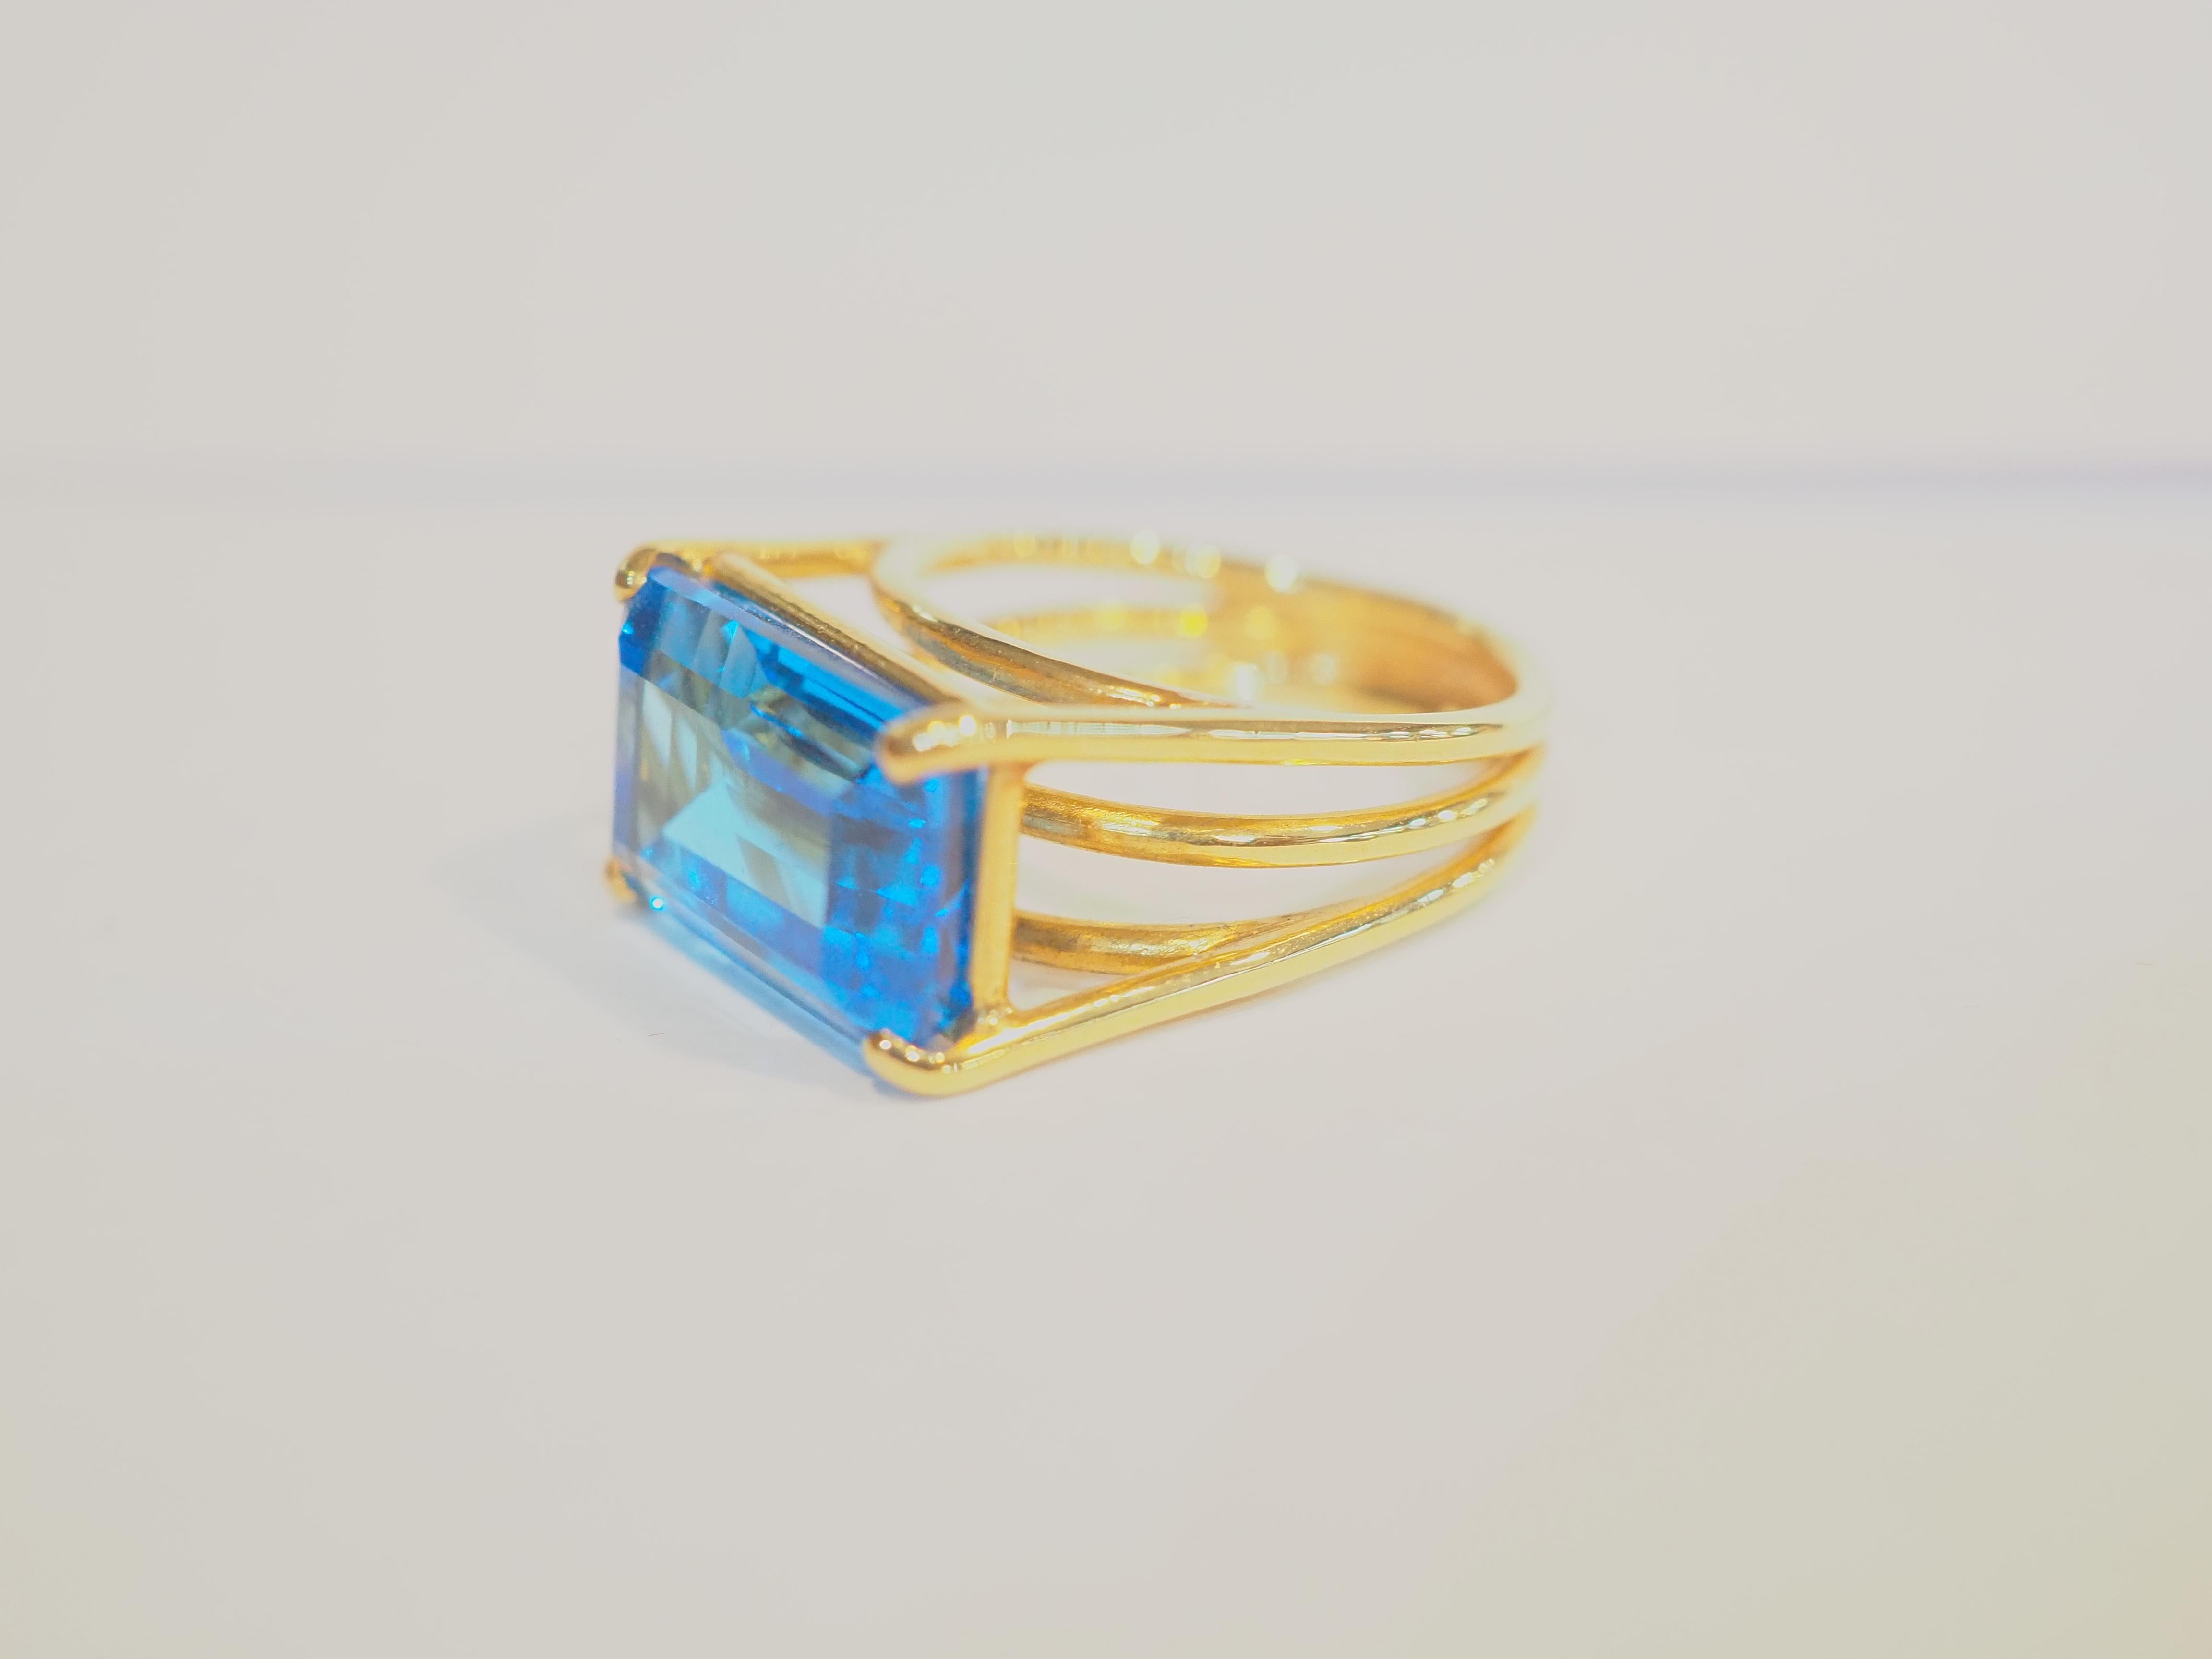  This beautiful cocktail ring boasts a spectacular and good quality rectangular cut blue topaz! The blue color saturation for this gemstone in particular is amazing with richer blue color. The design of the ring features three bands overlapping one